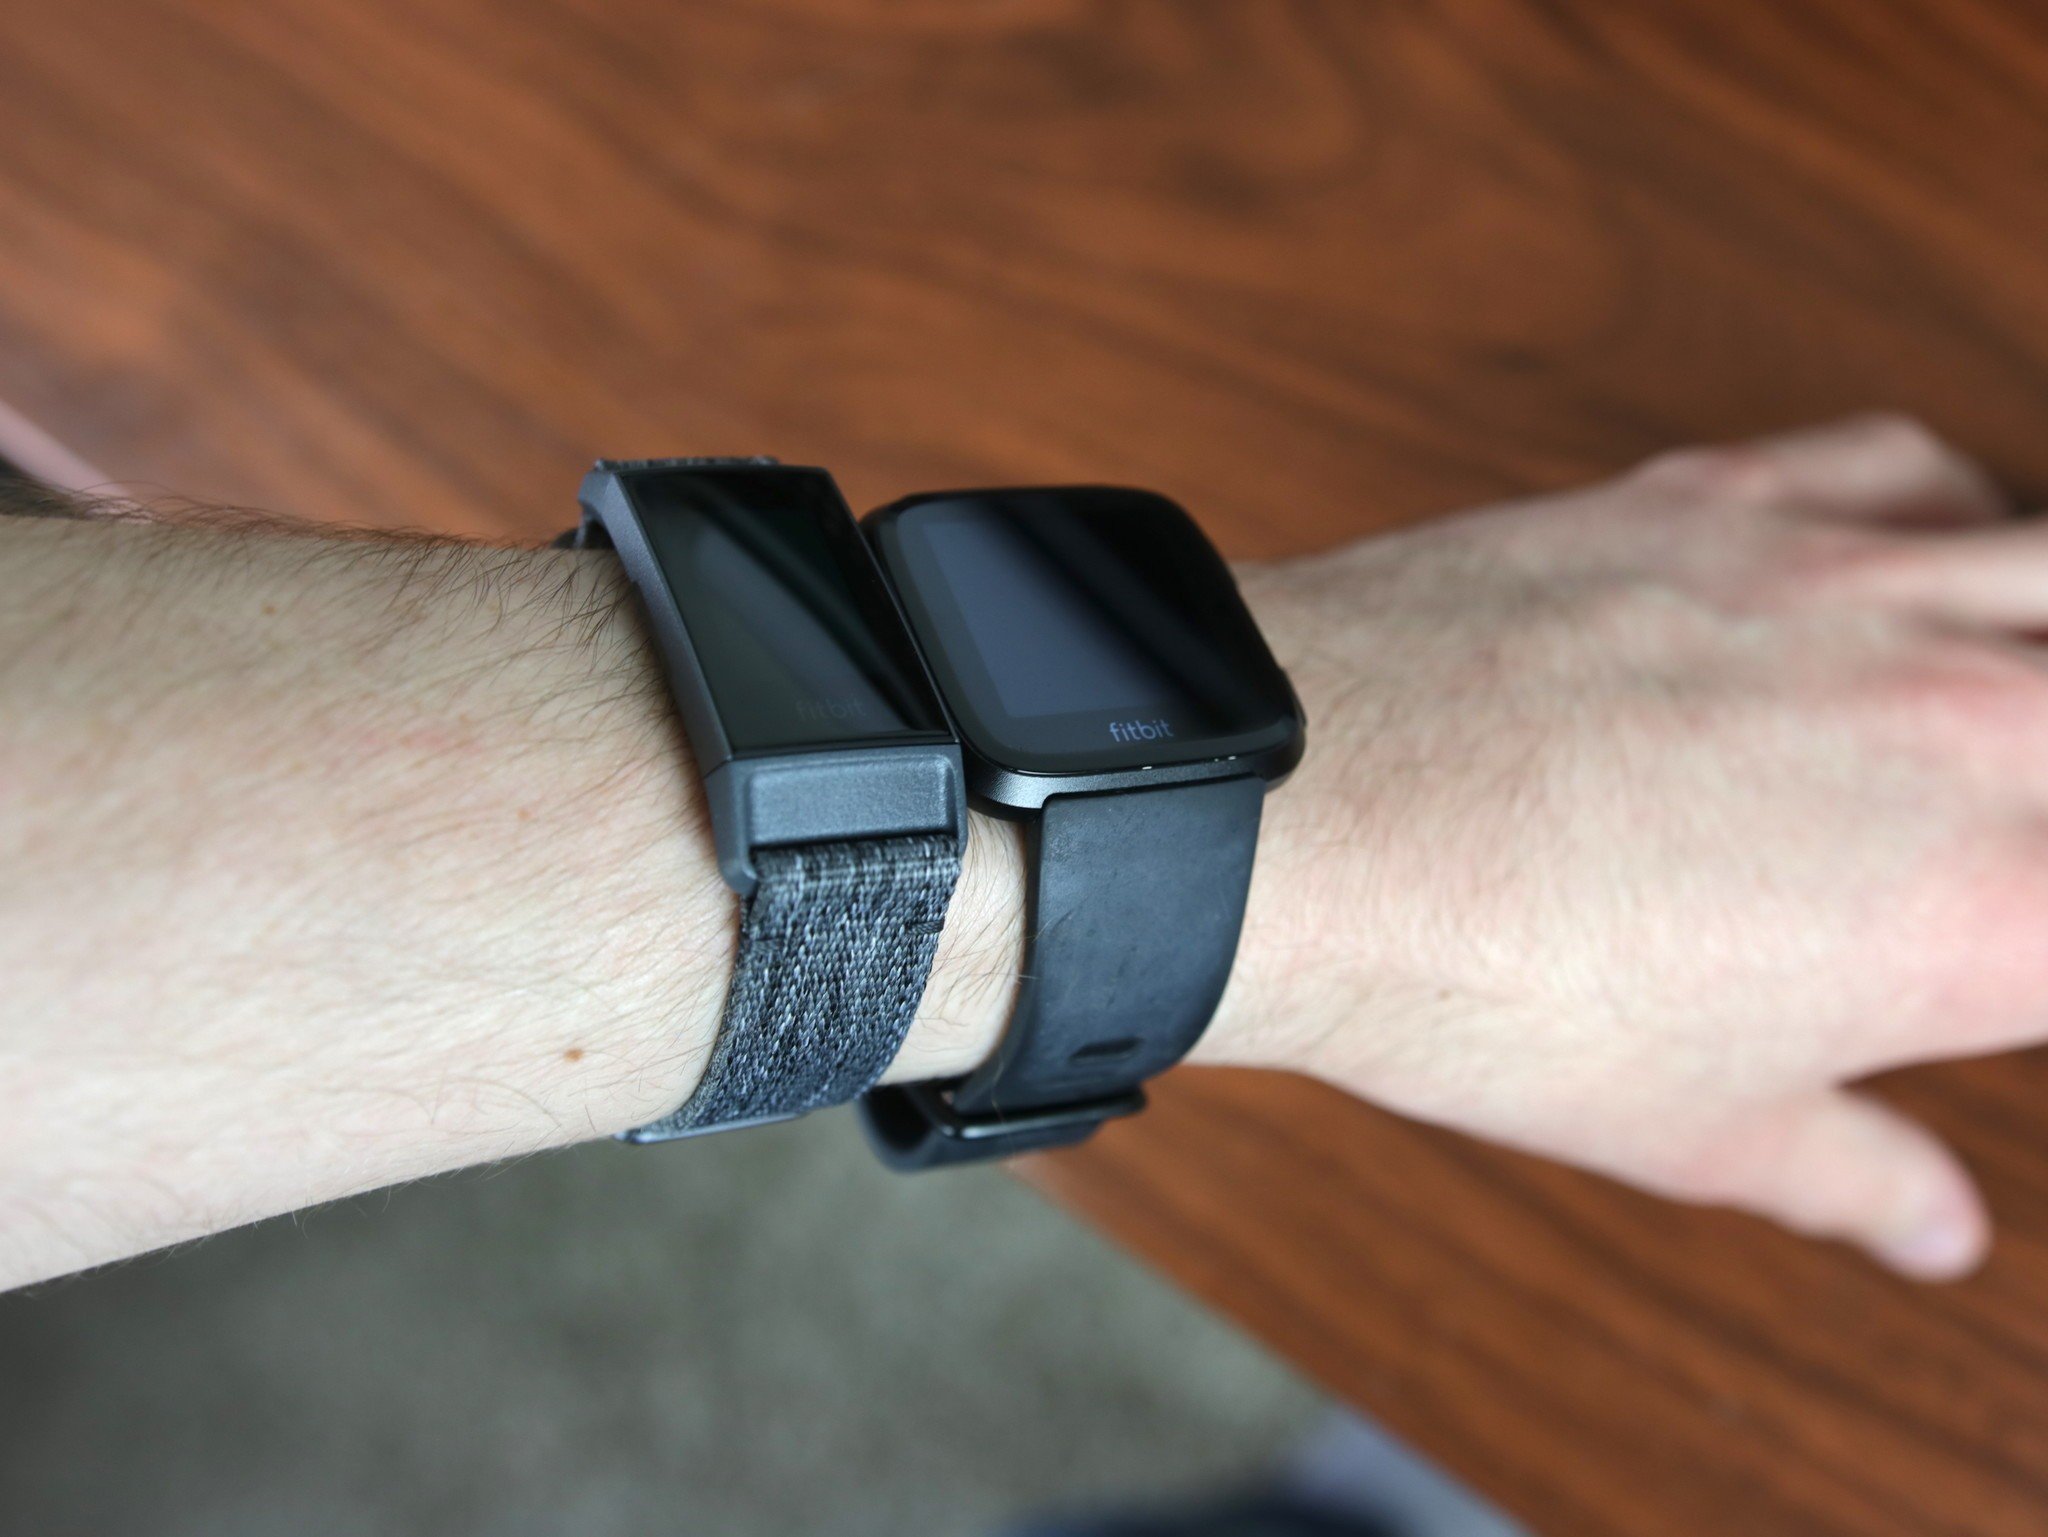 fitbit charge 3 vs apple watch 3